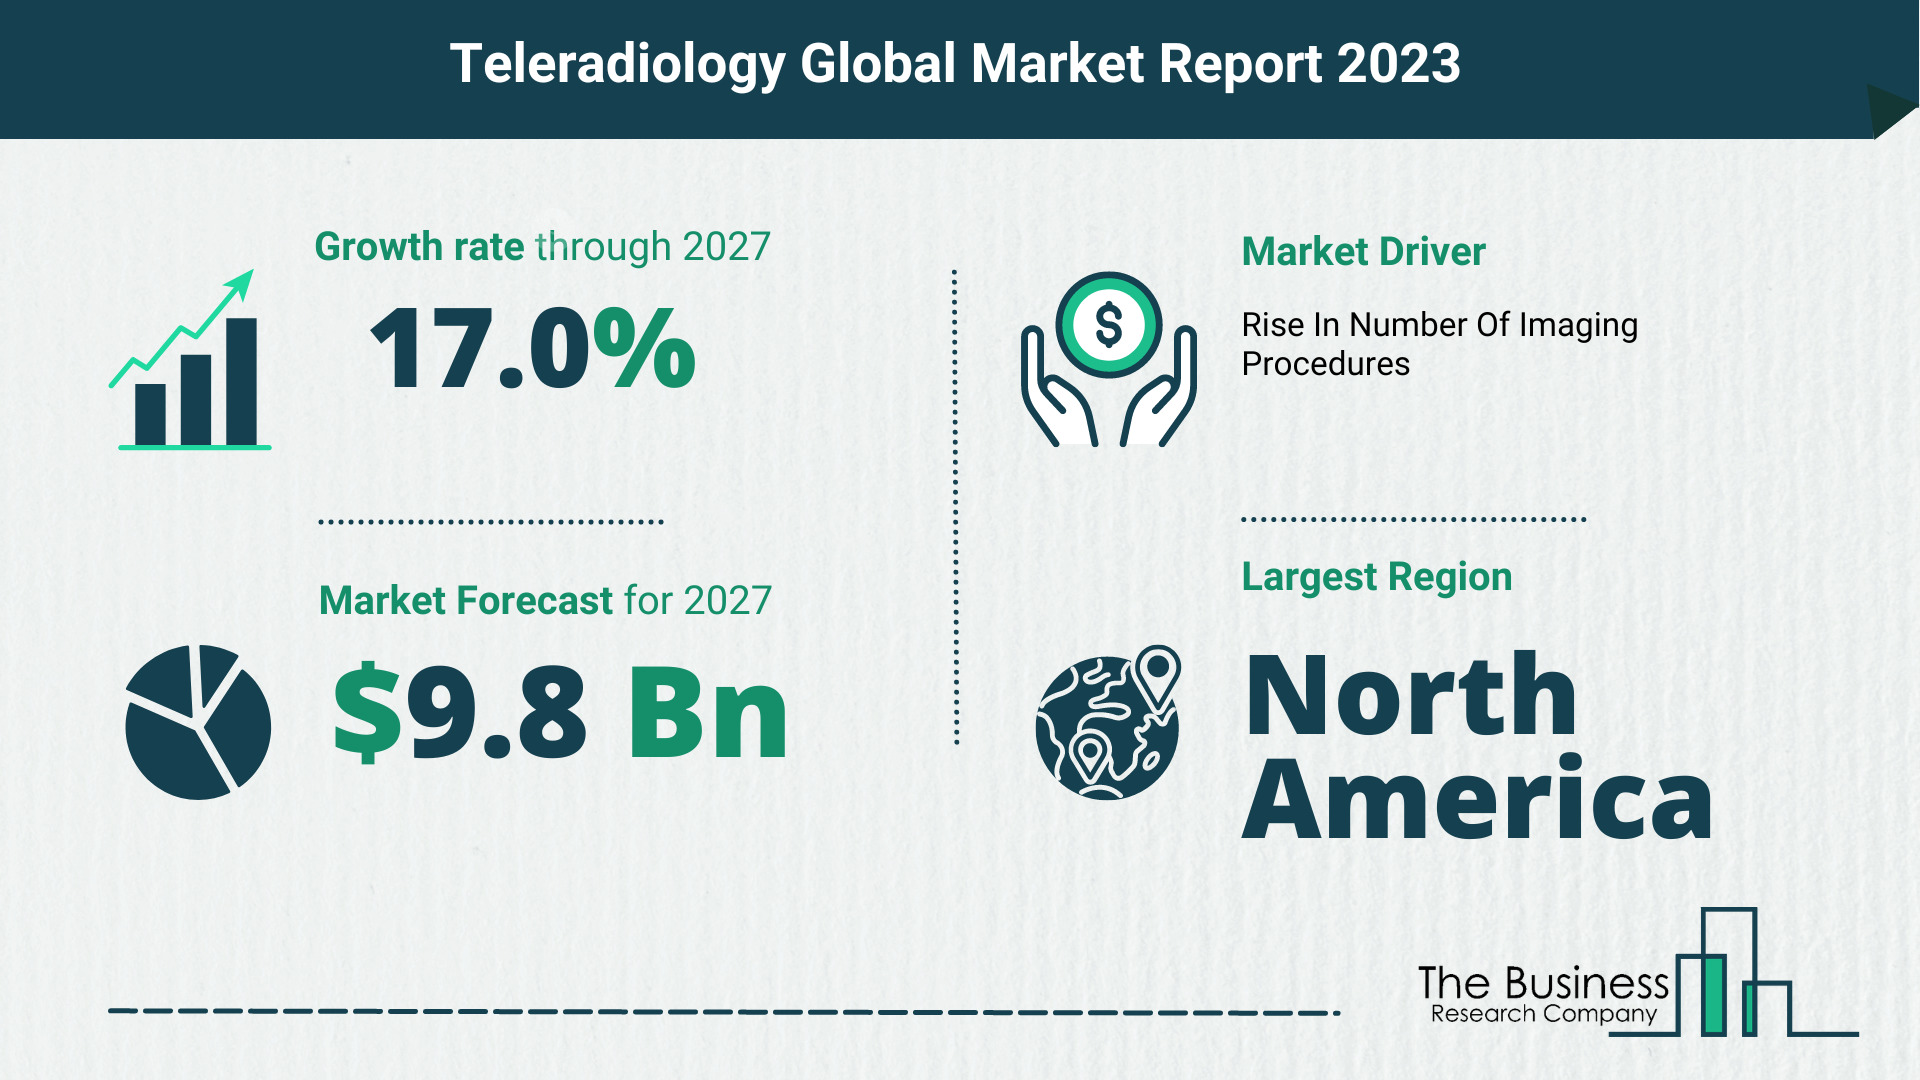 How Will The Teleradiology Market Globally Expand In 2023?